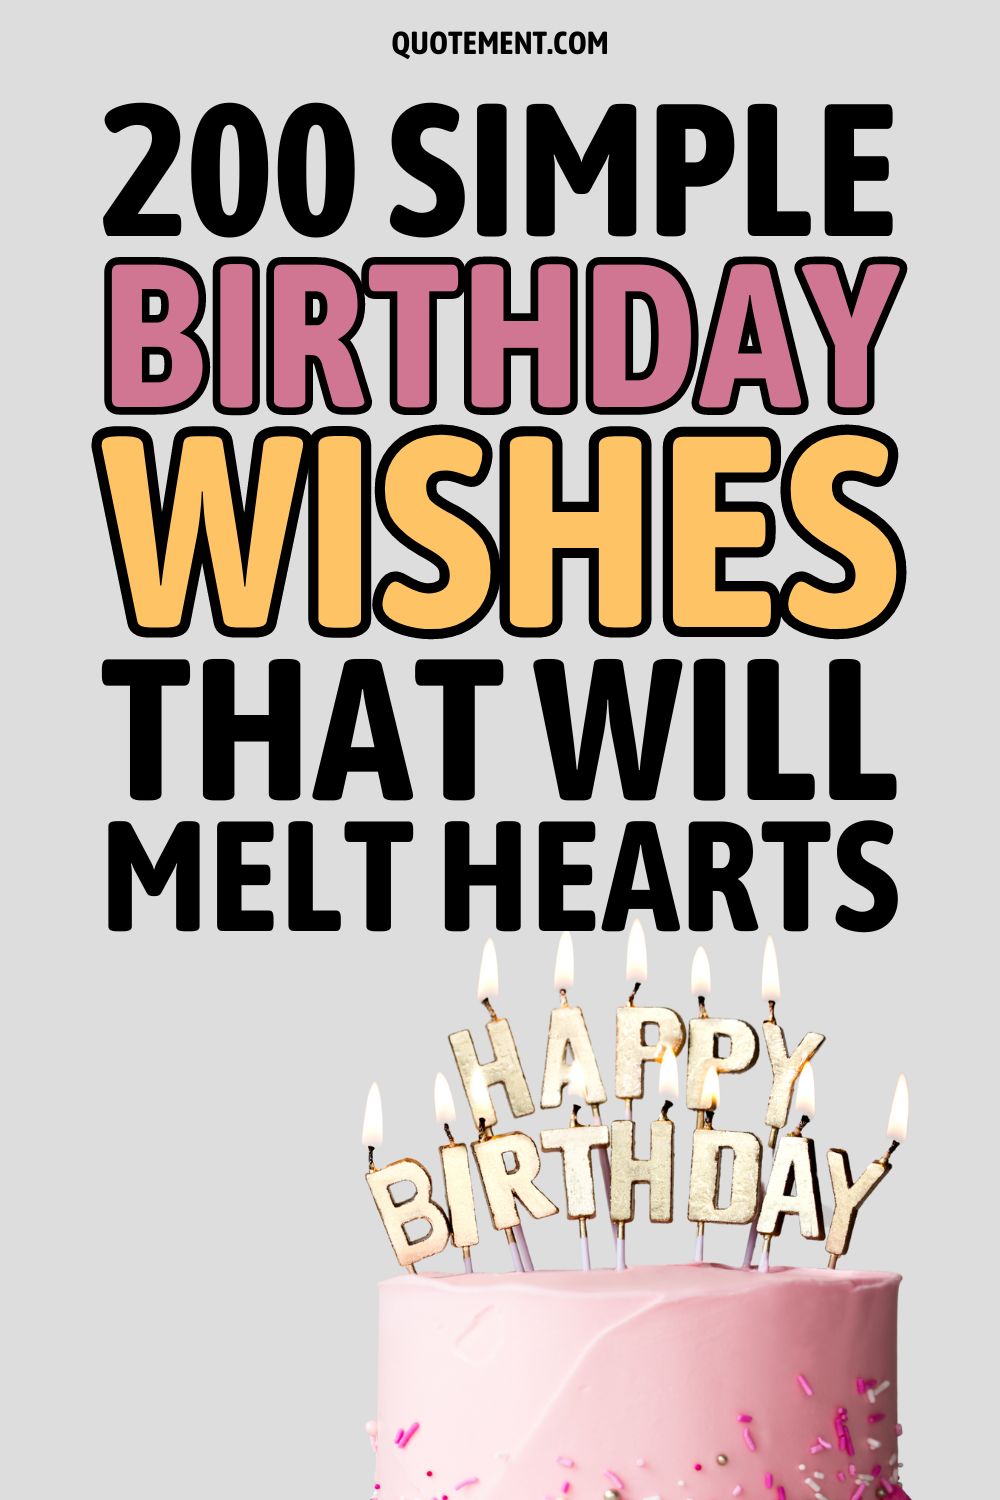 200 Simple Birthday Wishes That Will Melt Hearts
